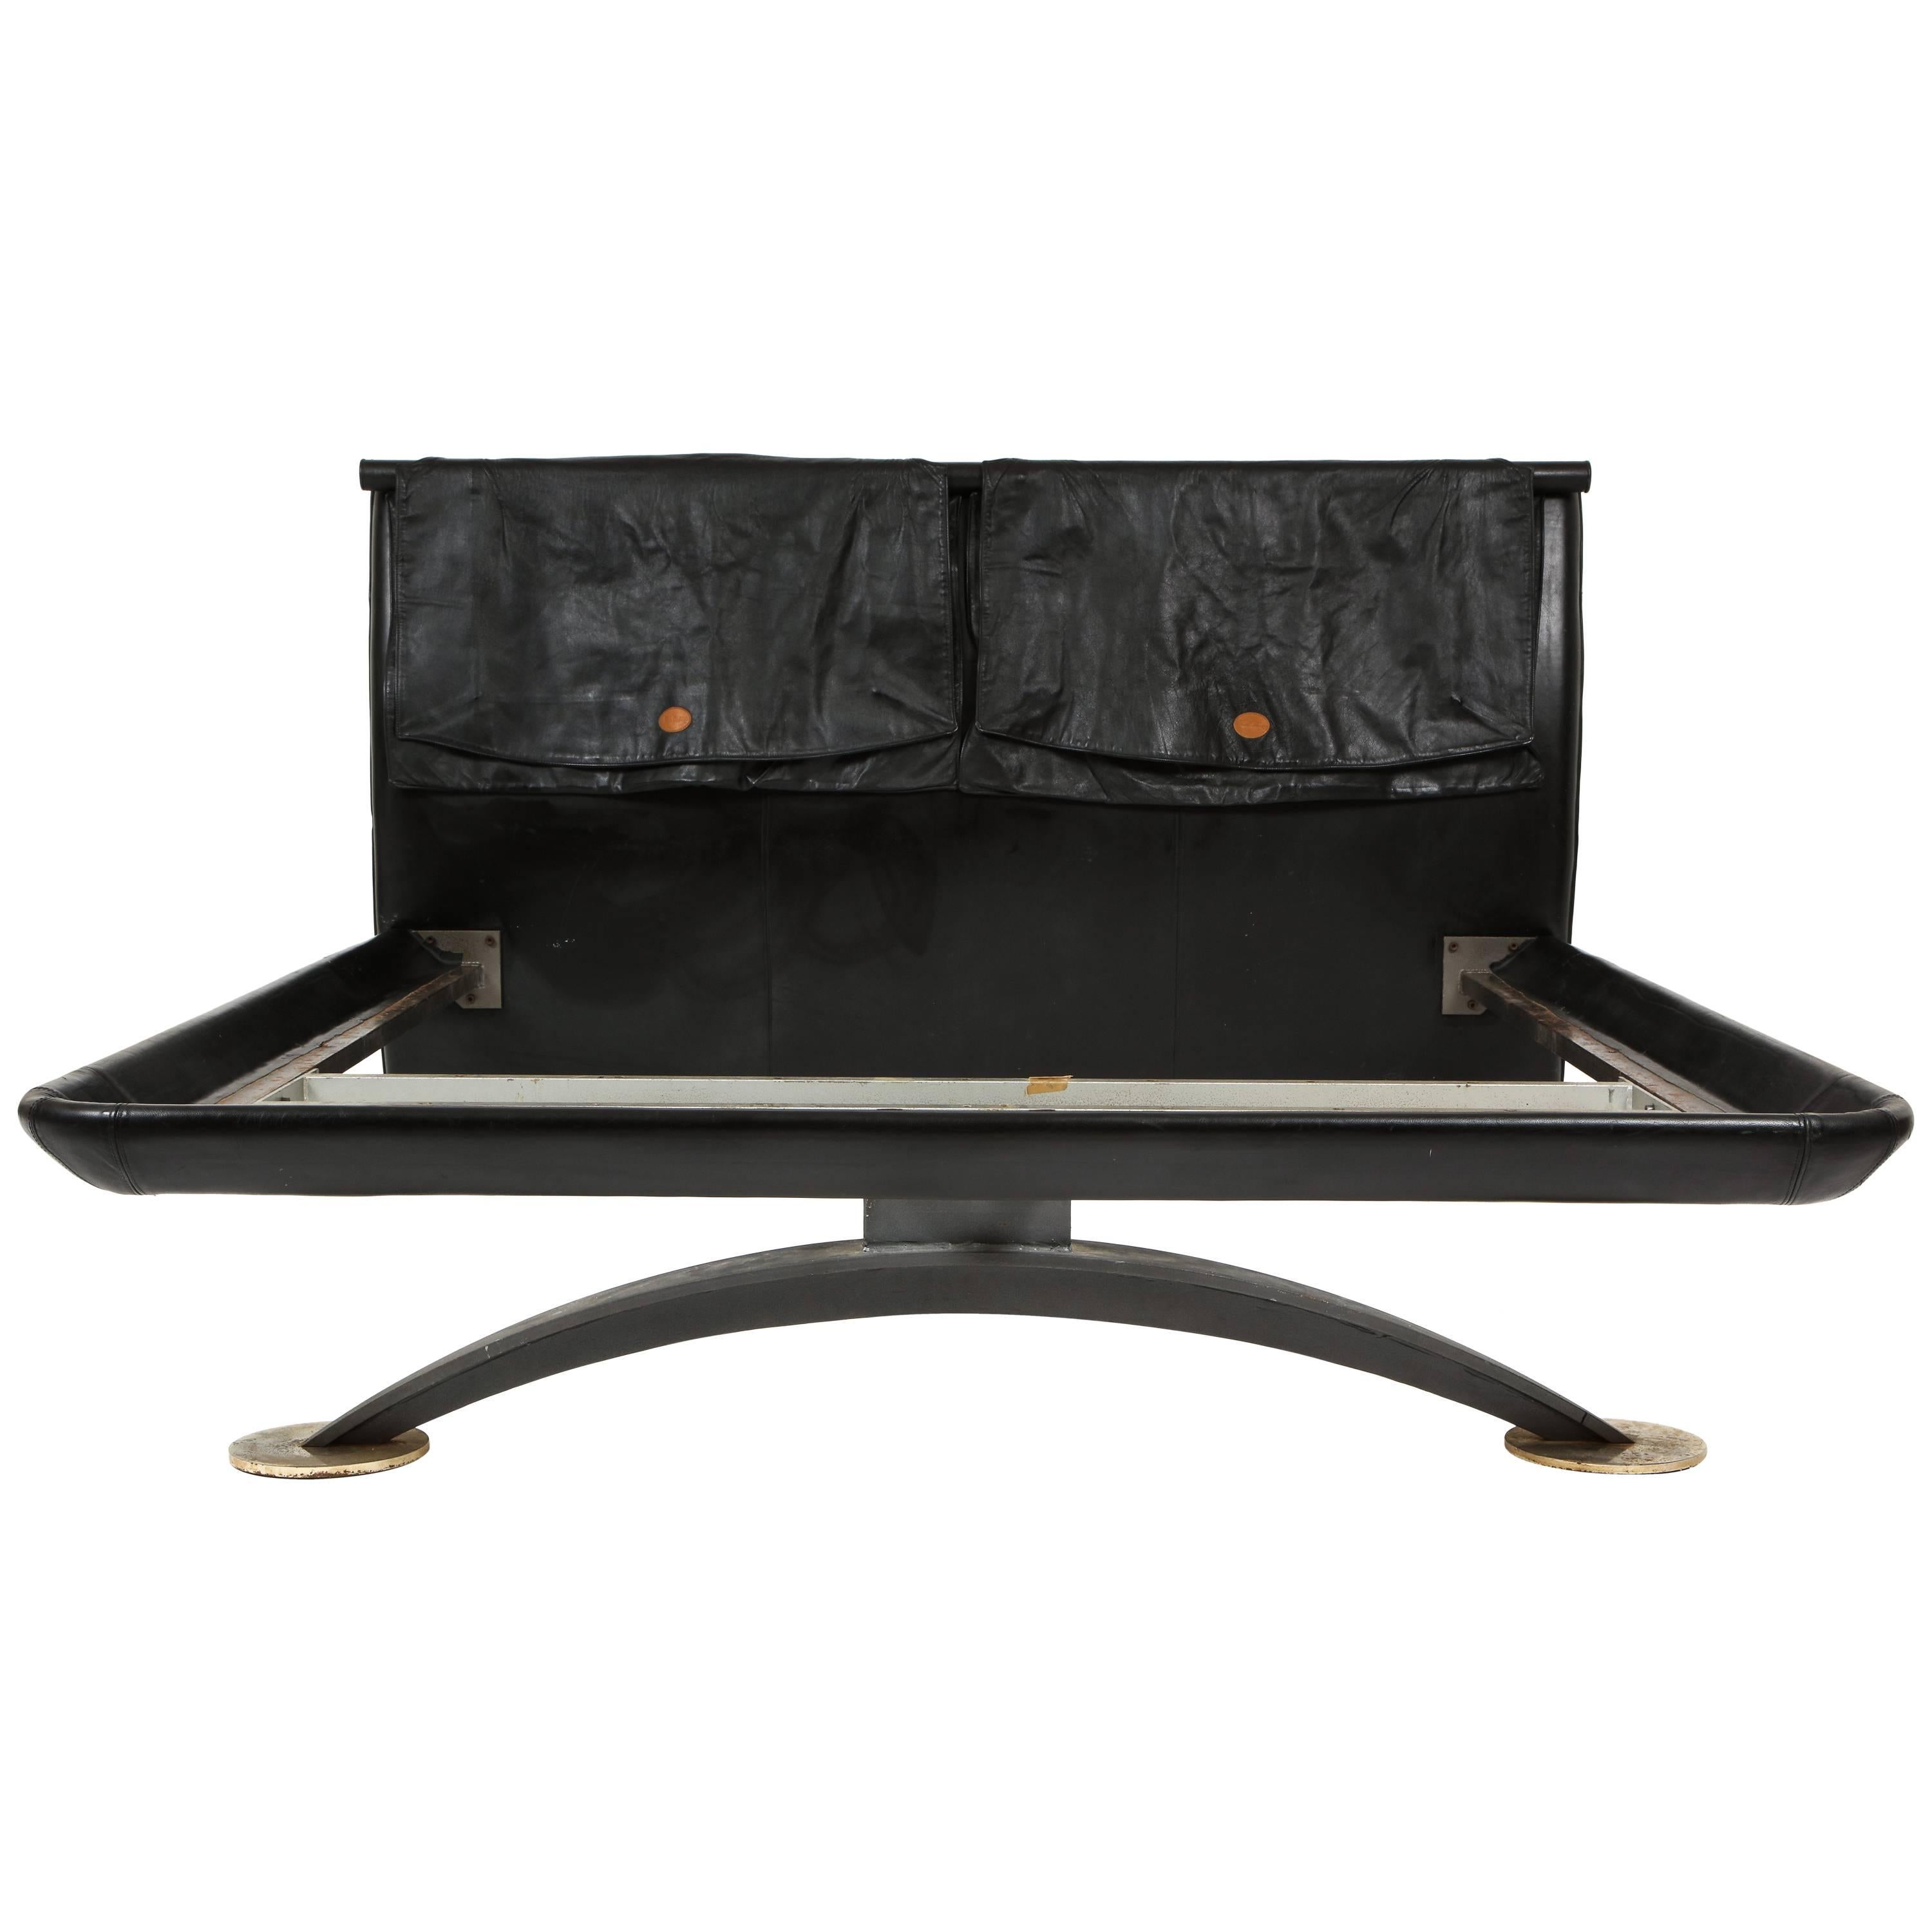 Pierre Cardin Black Leather Bed Bronze and Iron Base, 1970s-1980s